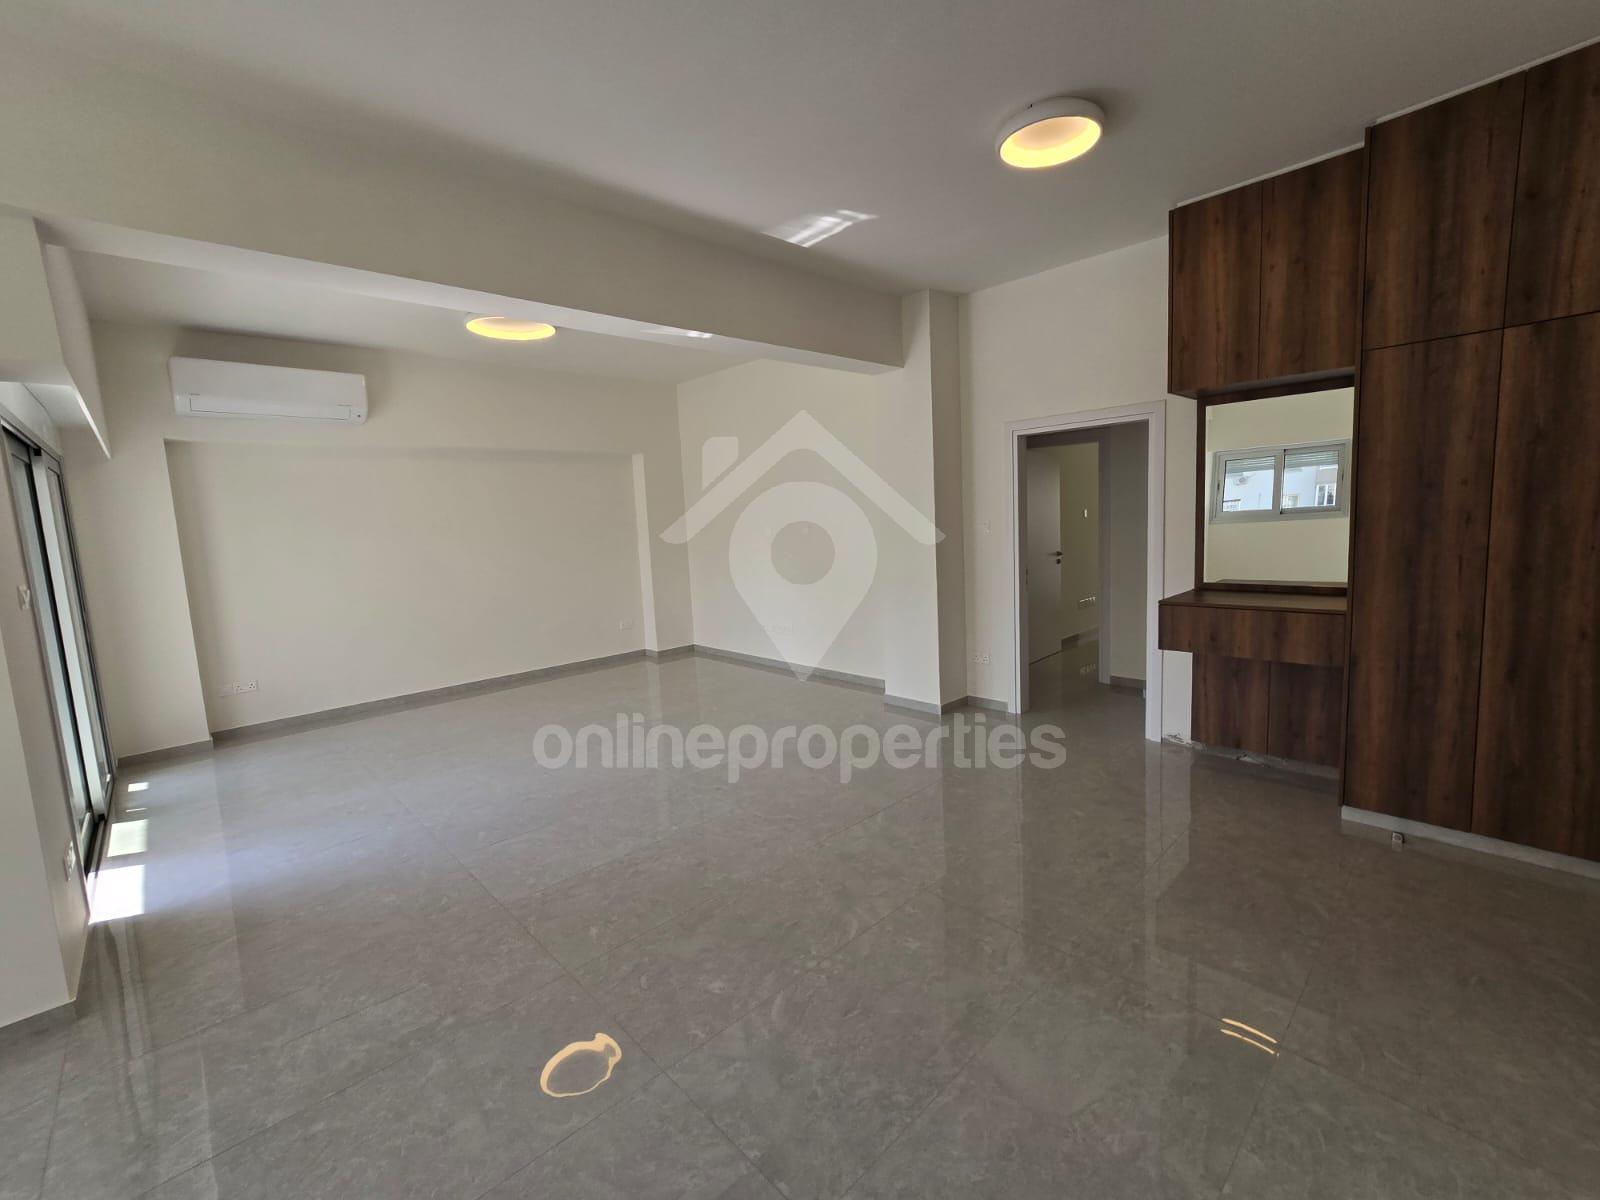 3-Bedroom Apartment in the Heart of the City Center